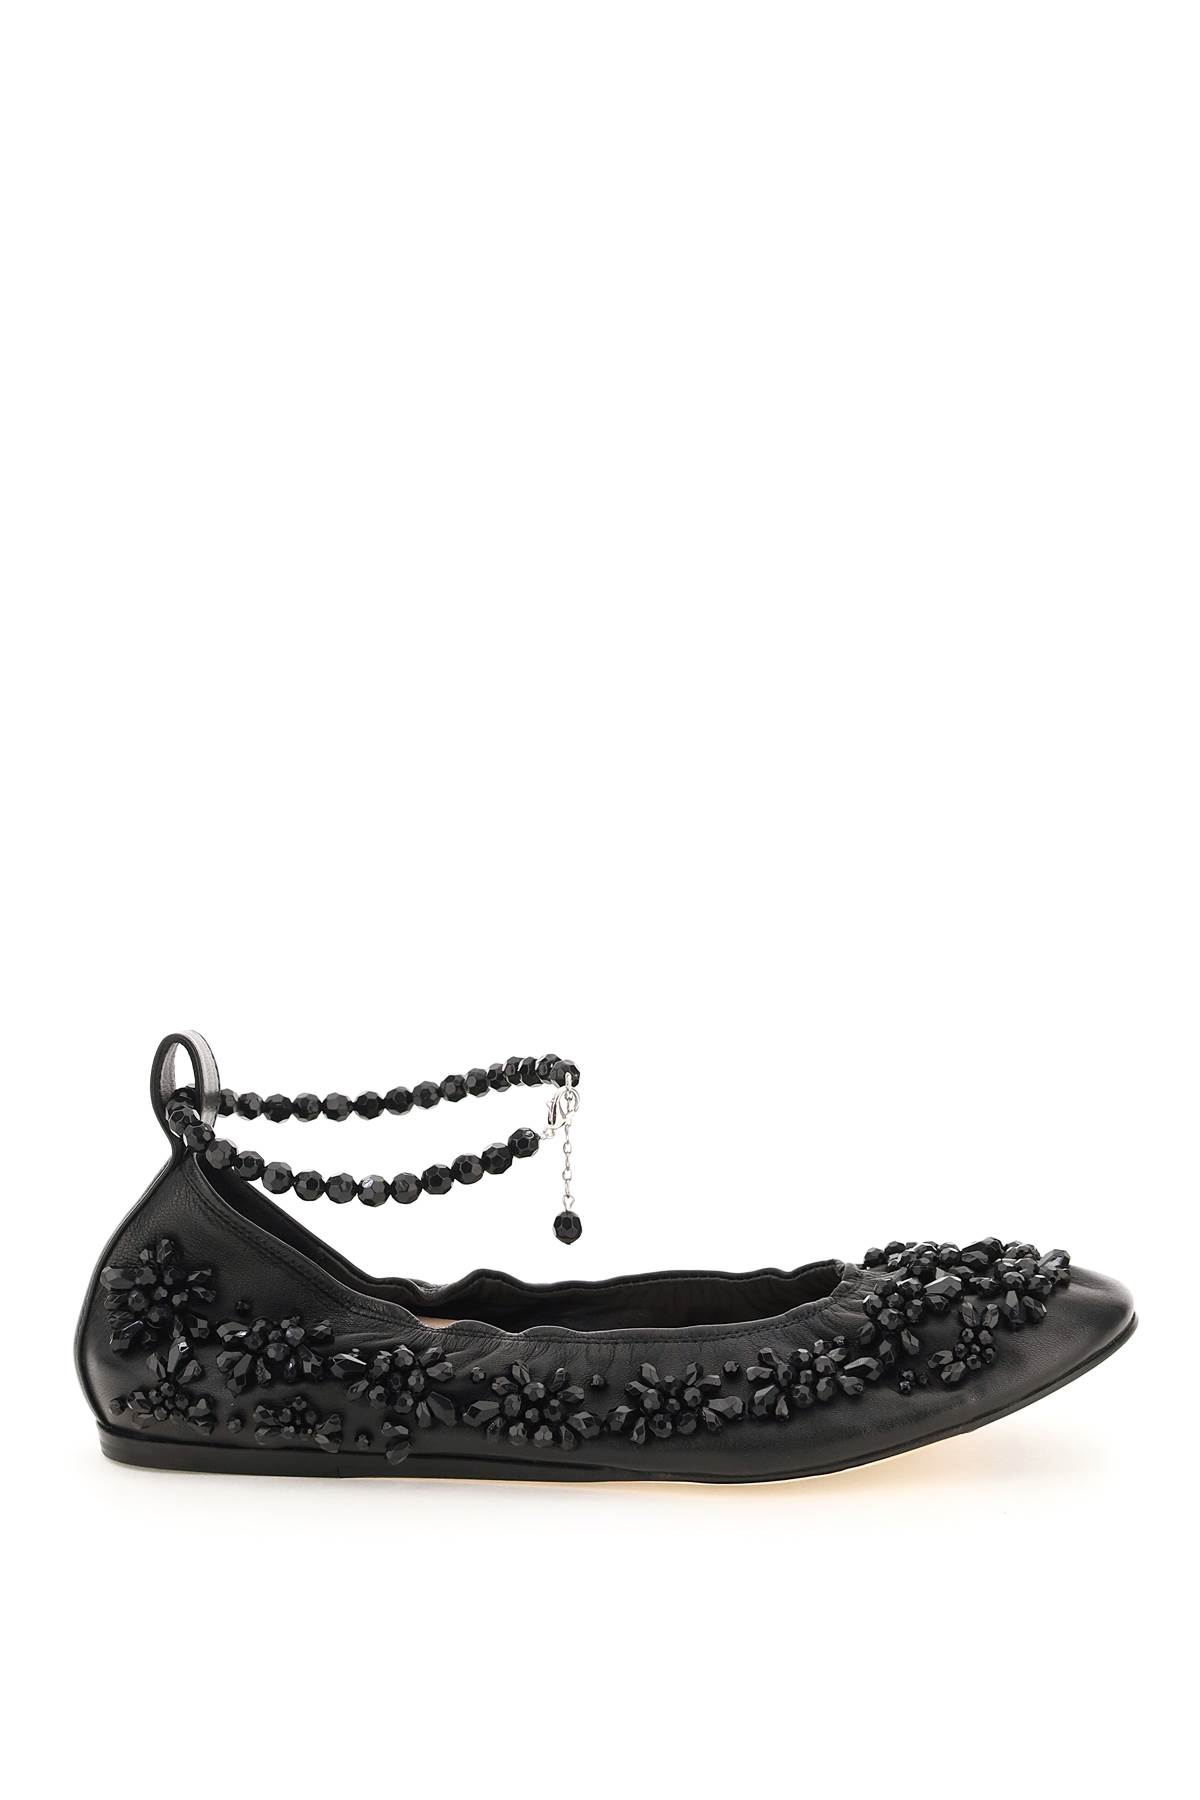 Simone Rocha Embellished Ballerina With Ankle Strap